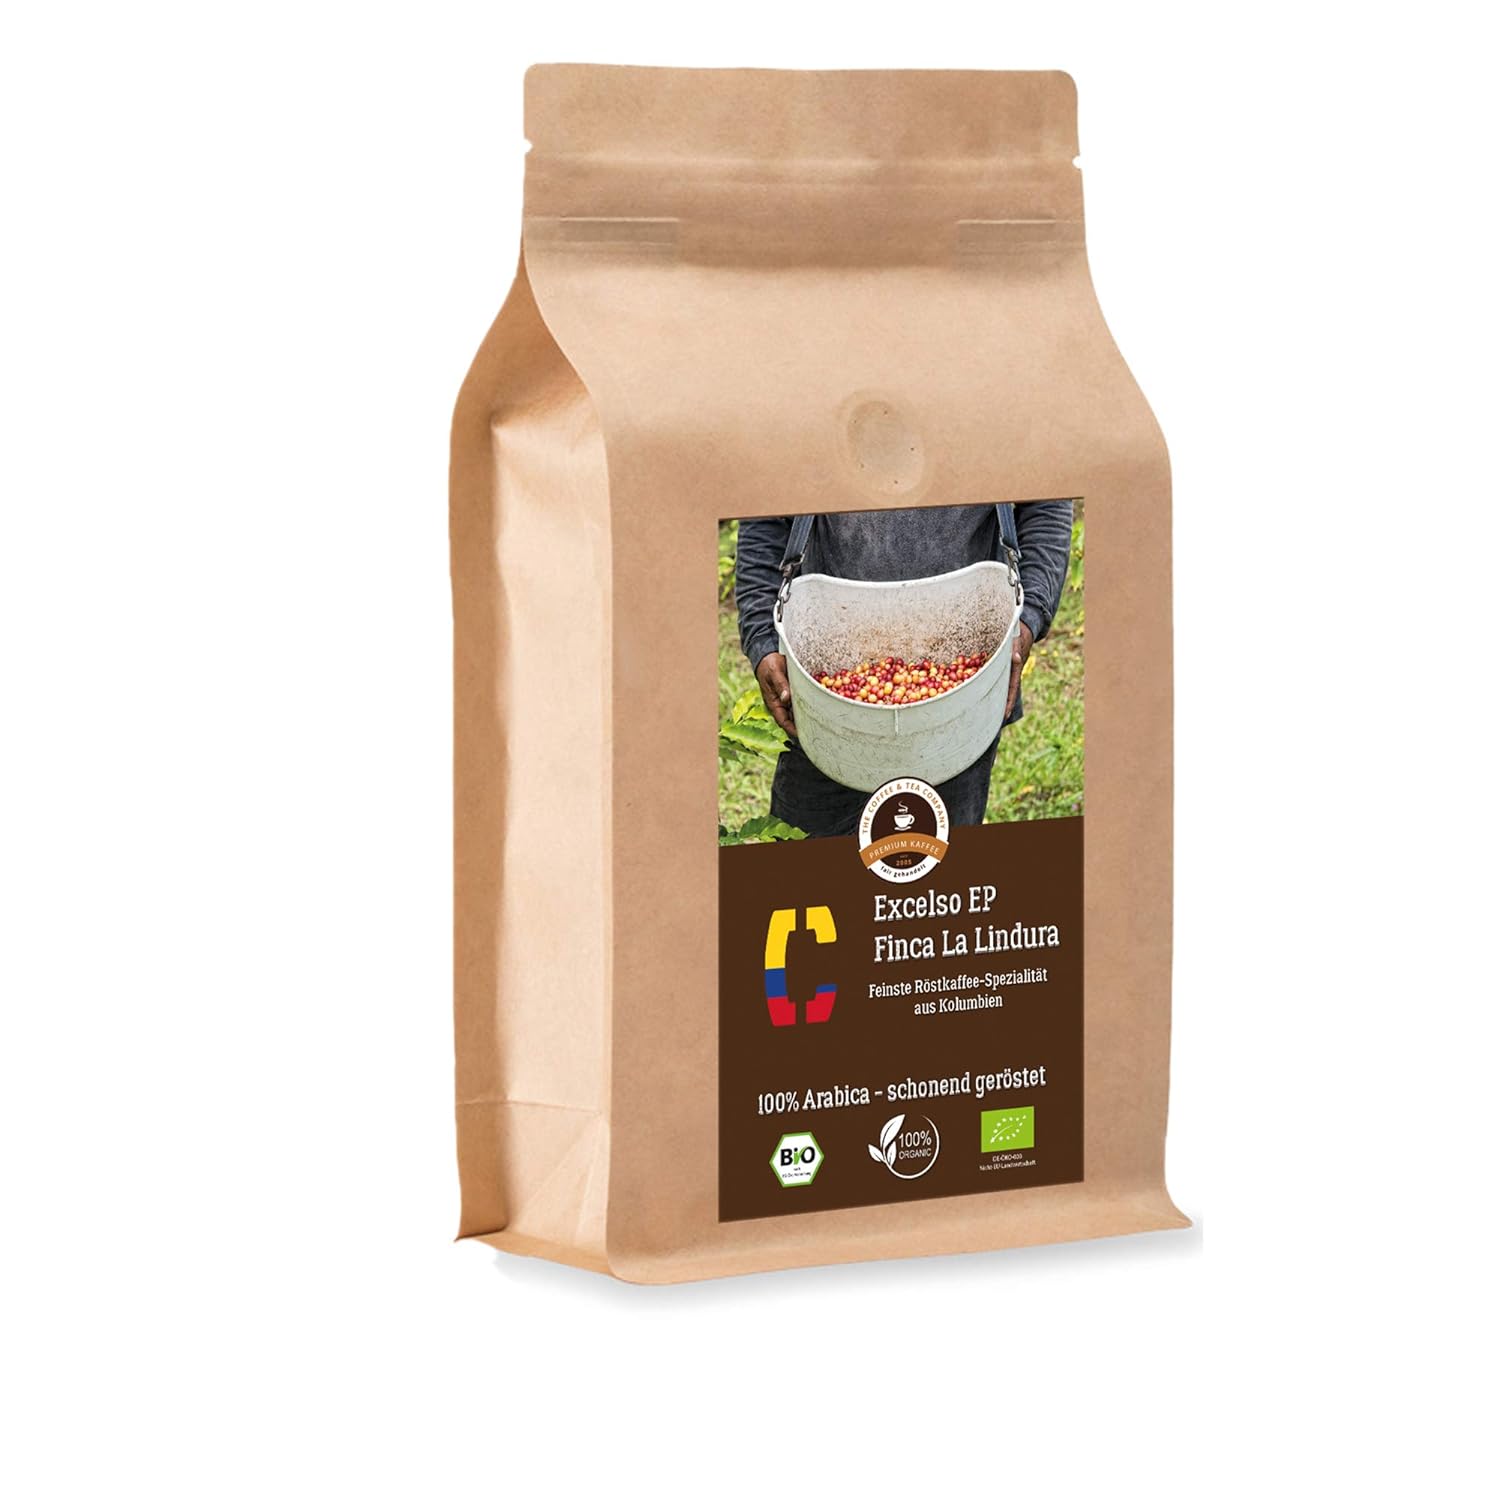 Coffee Globetrotter - Colombia Excelso EP Finca la Lindura - Organic - 500 g Finely Ground - for Fully Automatic Coffee Machine, Coffee Grinder, Hand Mill, Top Coffee - Roasted Coffee from Organic